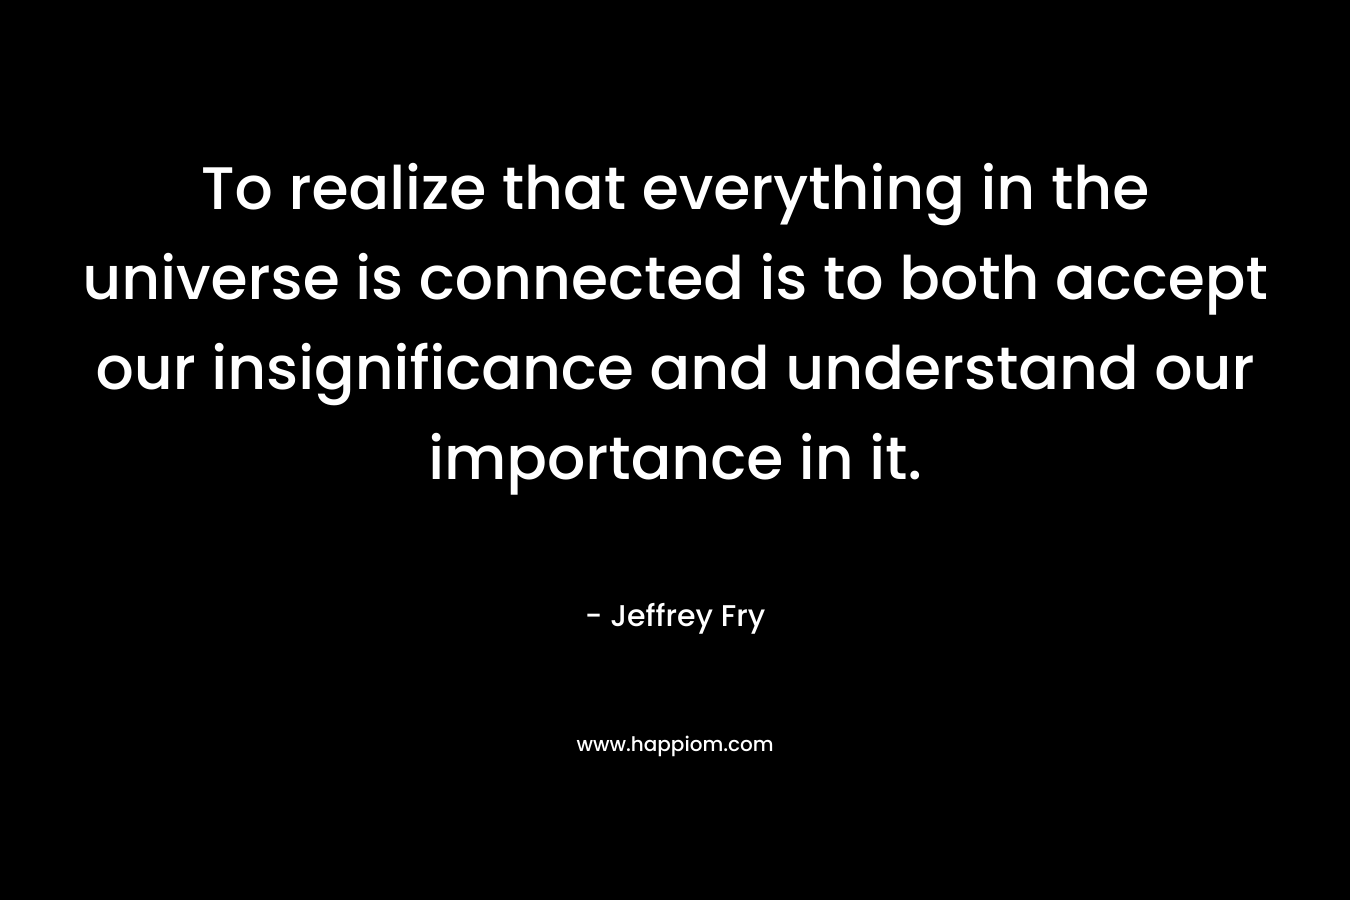 To realize that everything in the universe is connected is to both accept our insignificance and understand our importance in it.